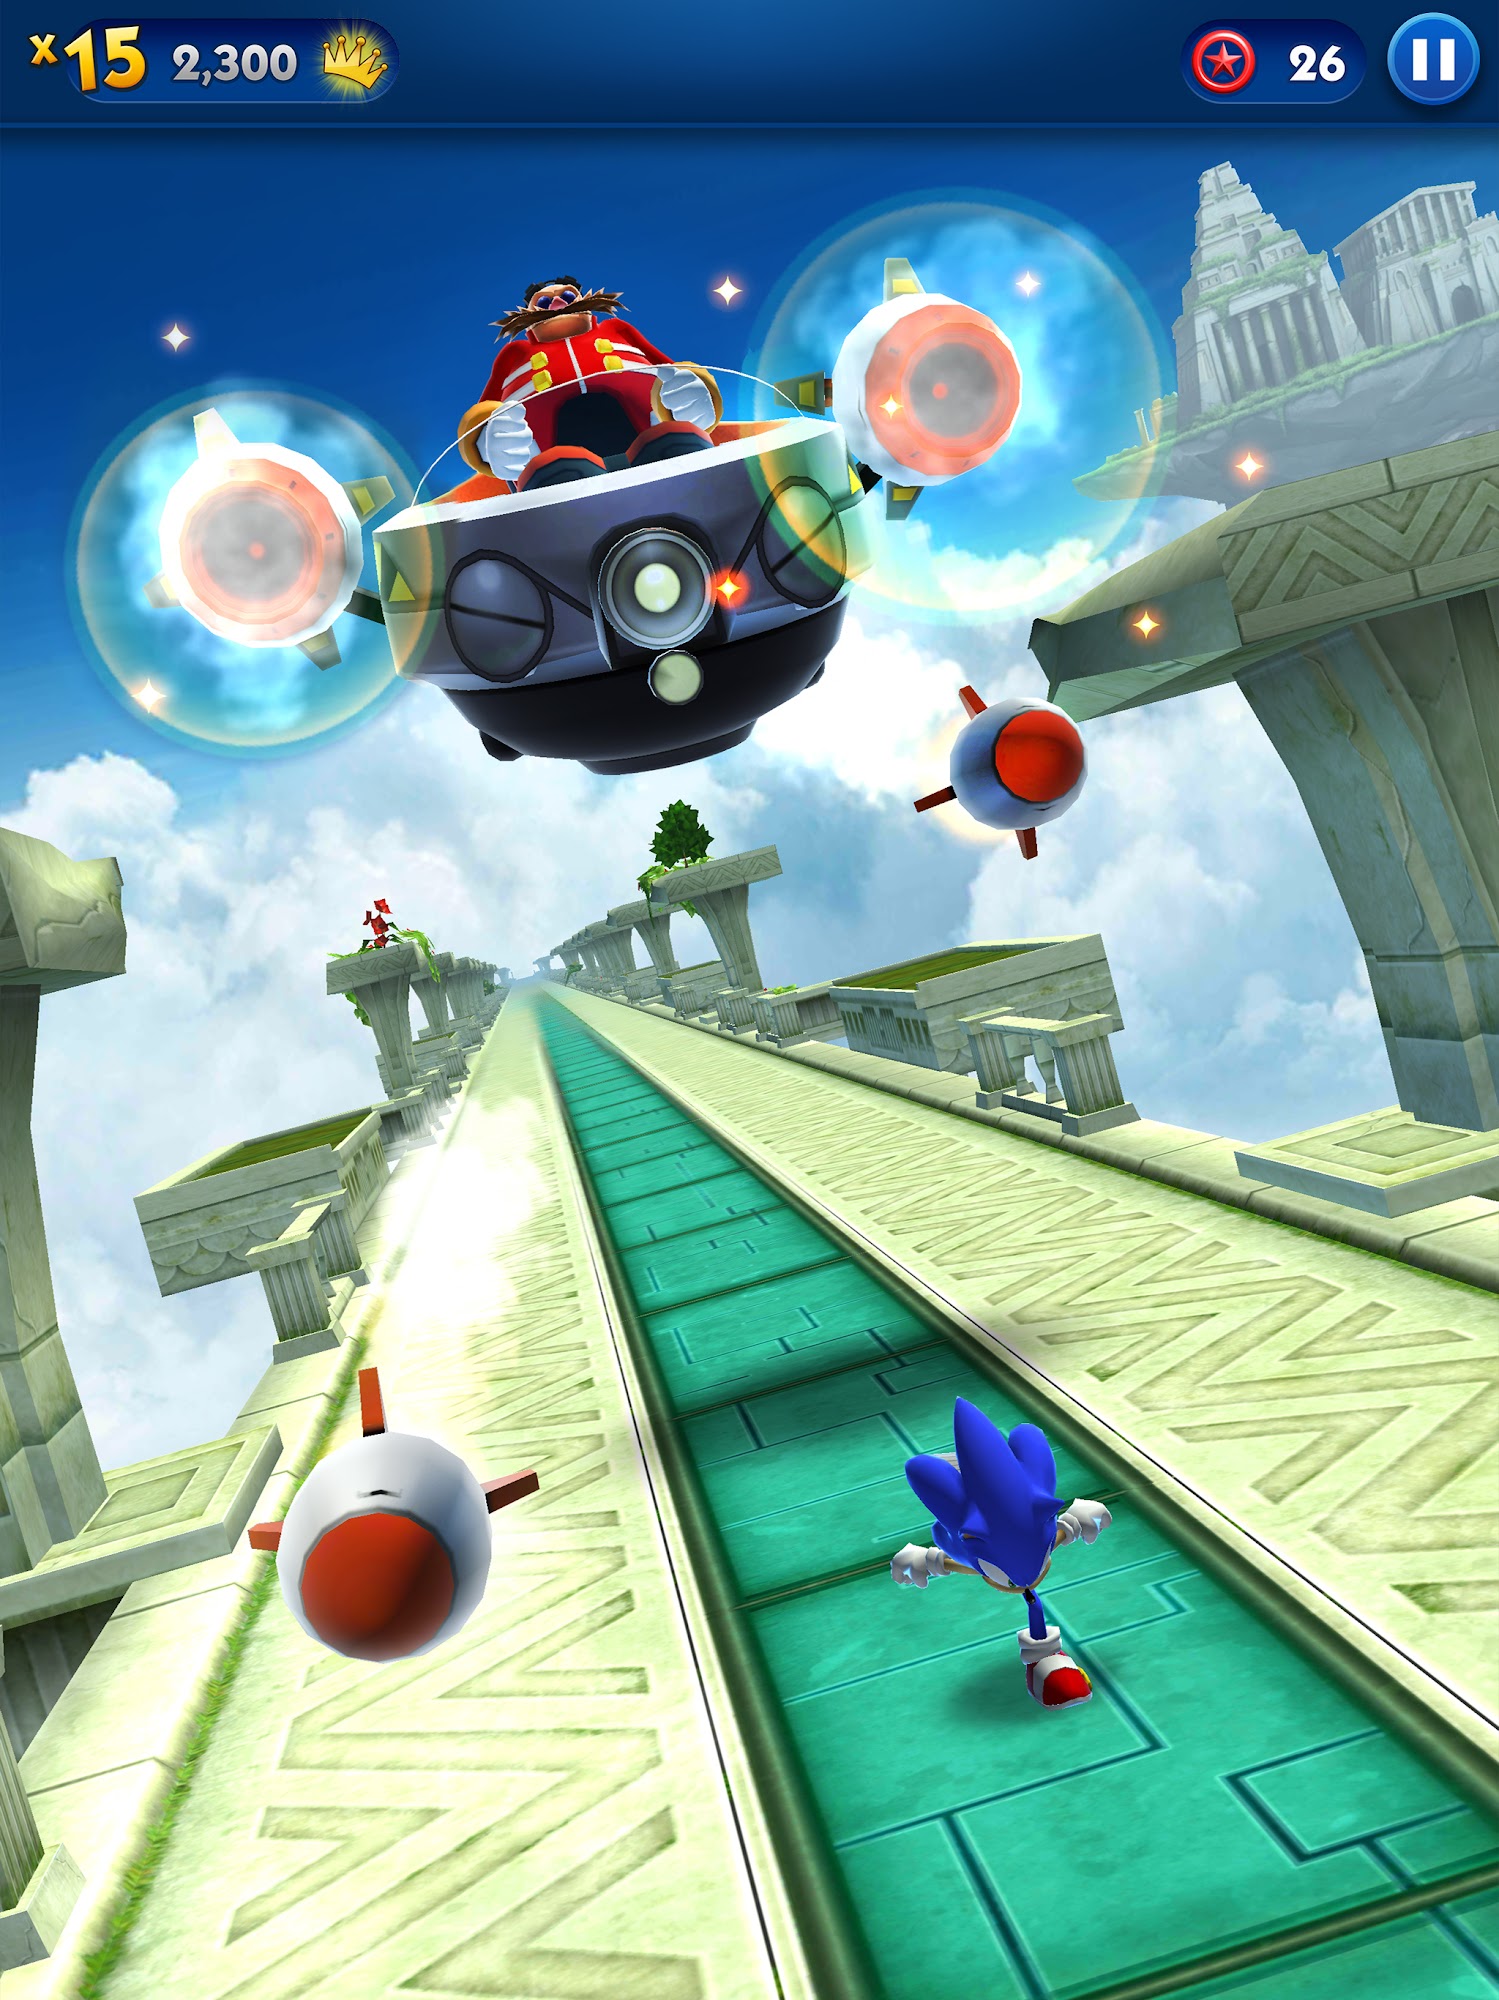 Gameplay of the Sonic Prime Dash for Android phone or tablet.